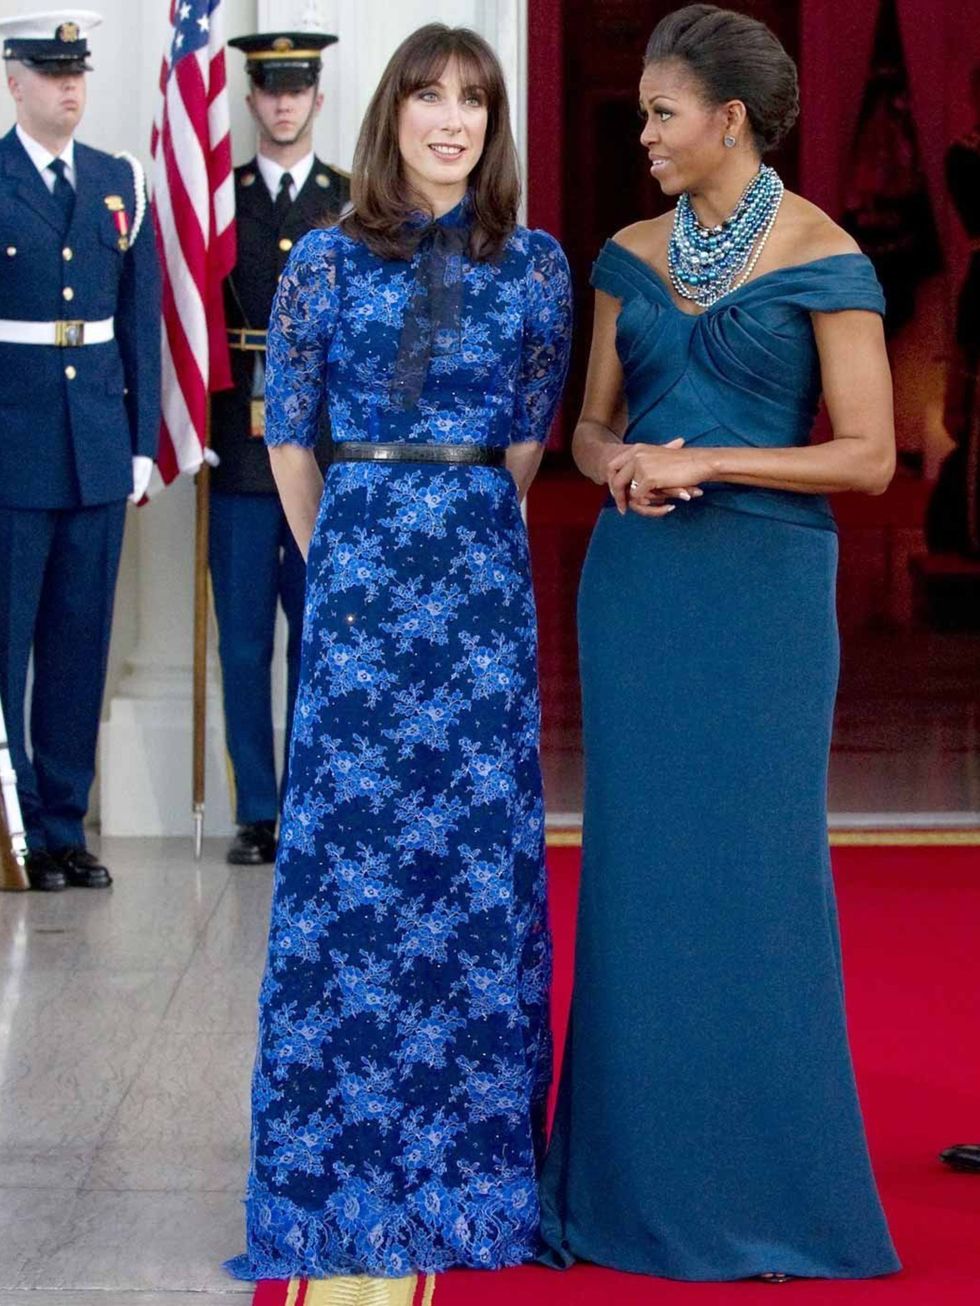 <p>Samantha Cameron wearing an Alessandra Rich column gown with Next shoes, stands next to Michelle Obama during a visit in Washington DC, February 2012.</p>